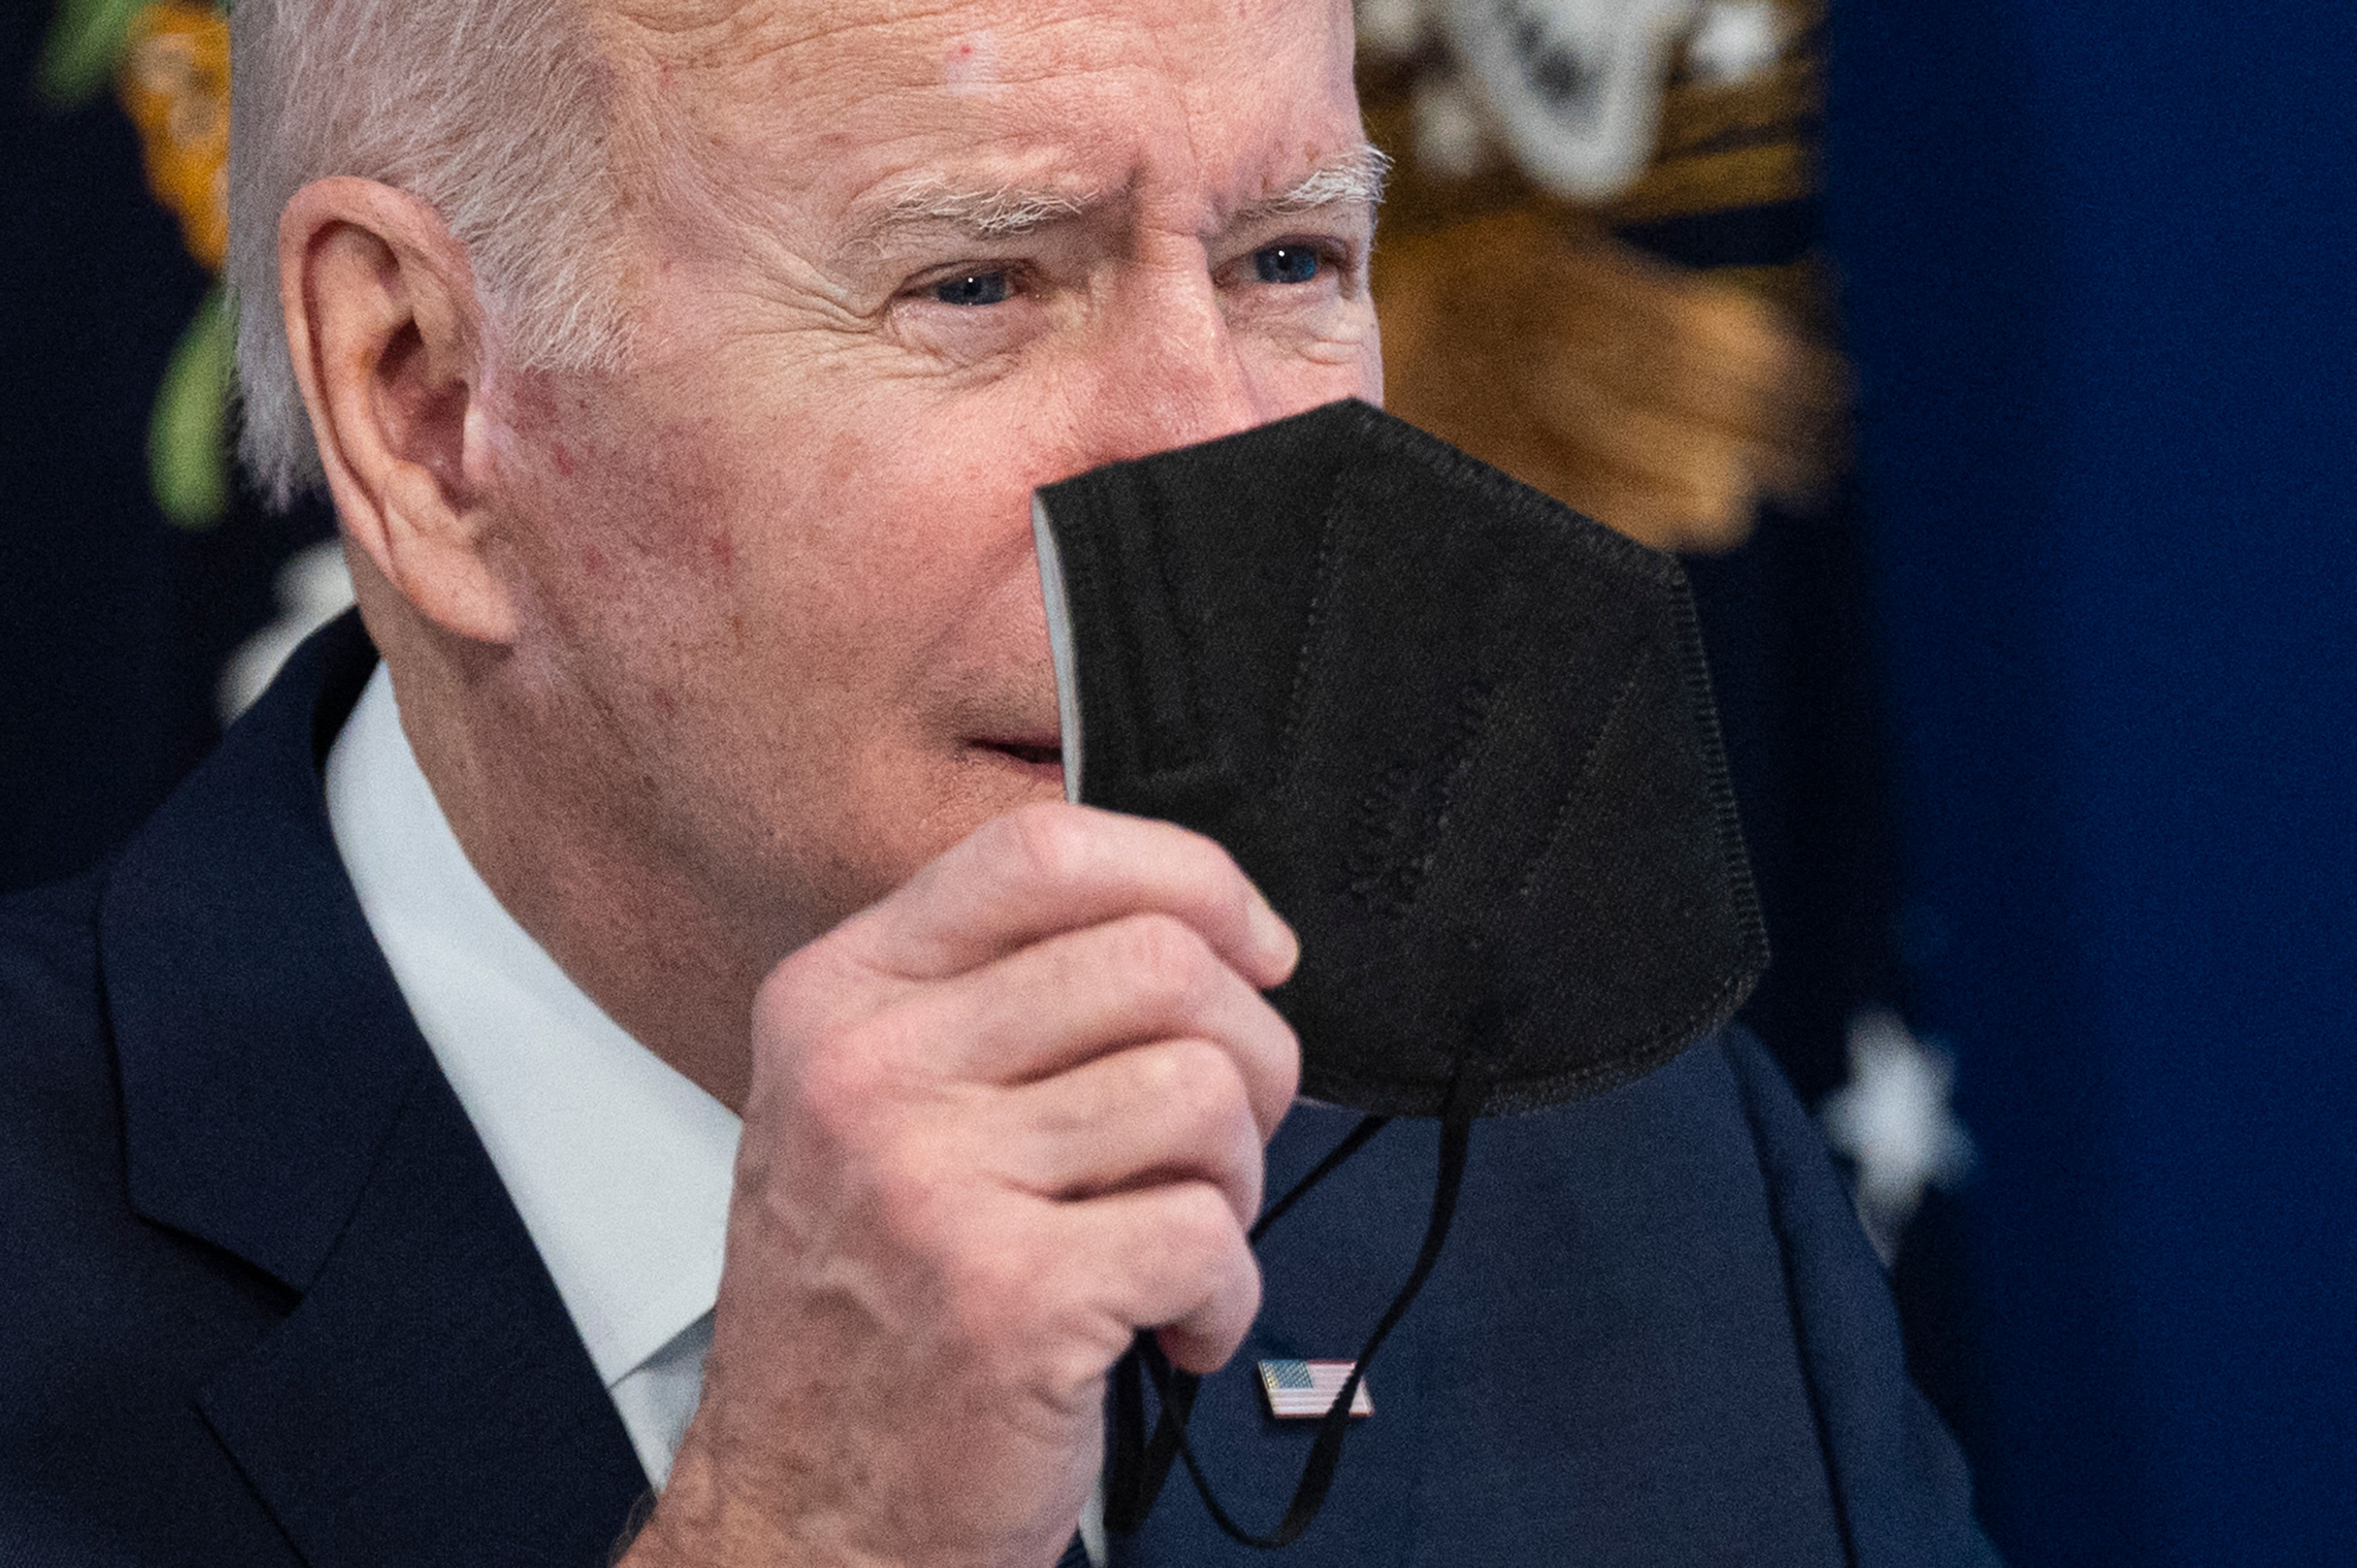 Biden says U.S. to provide high-quality masks for free to Americans